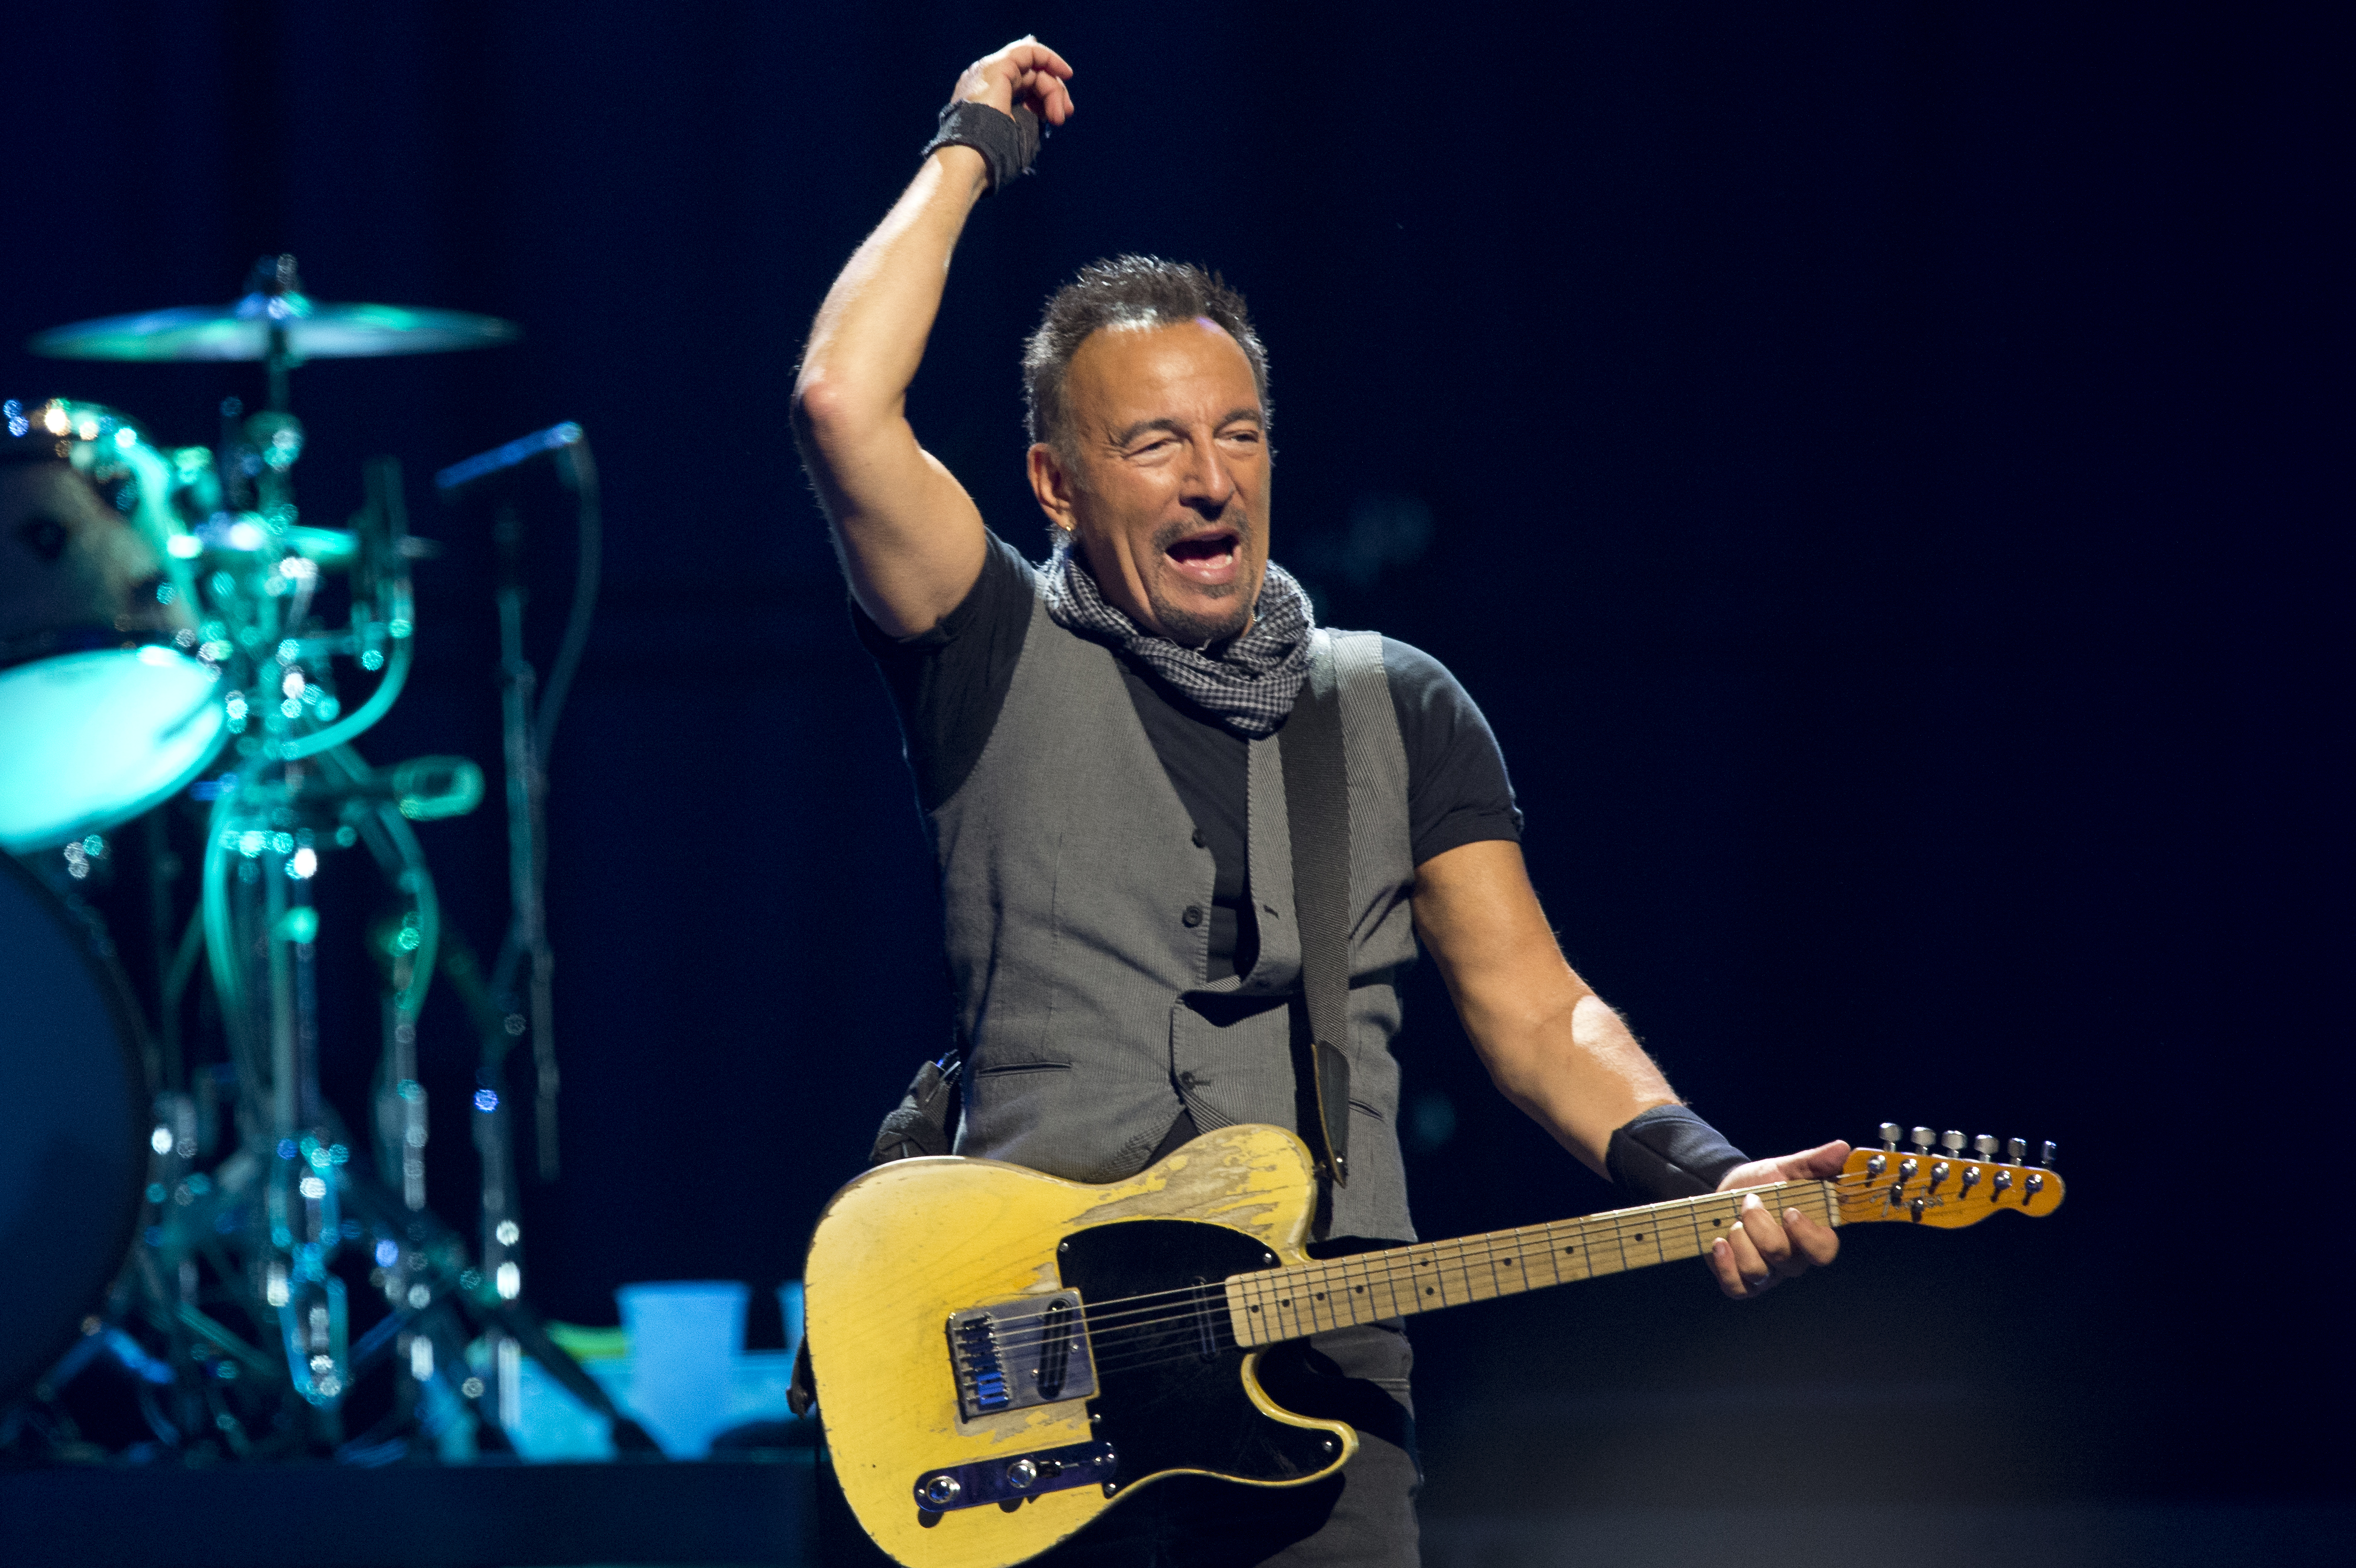 Bruce Springsteen raises his hand while playing a guitar